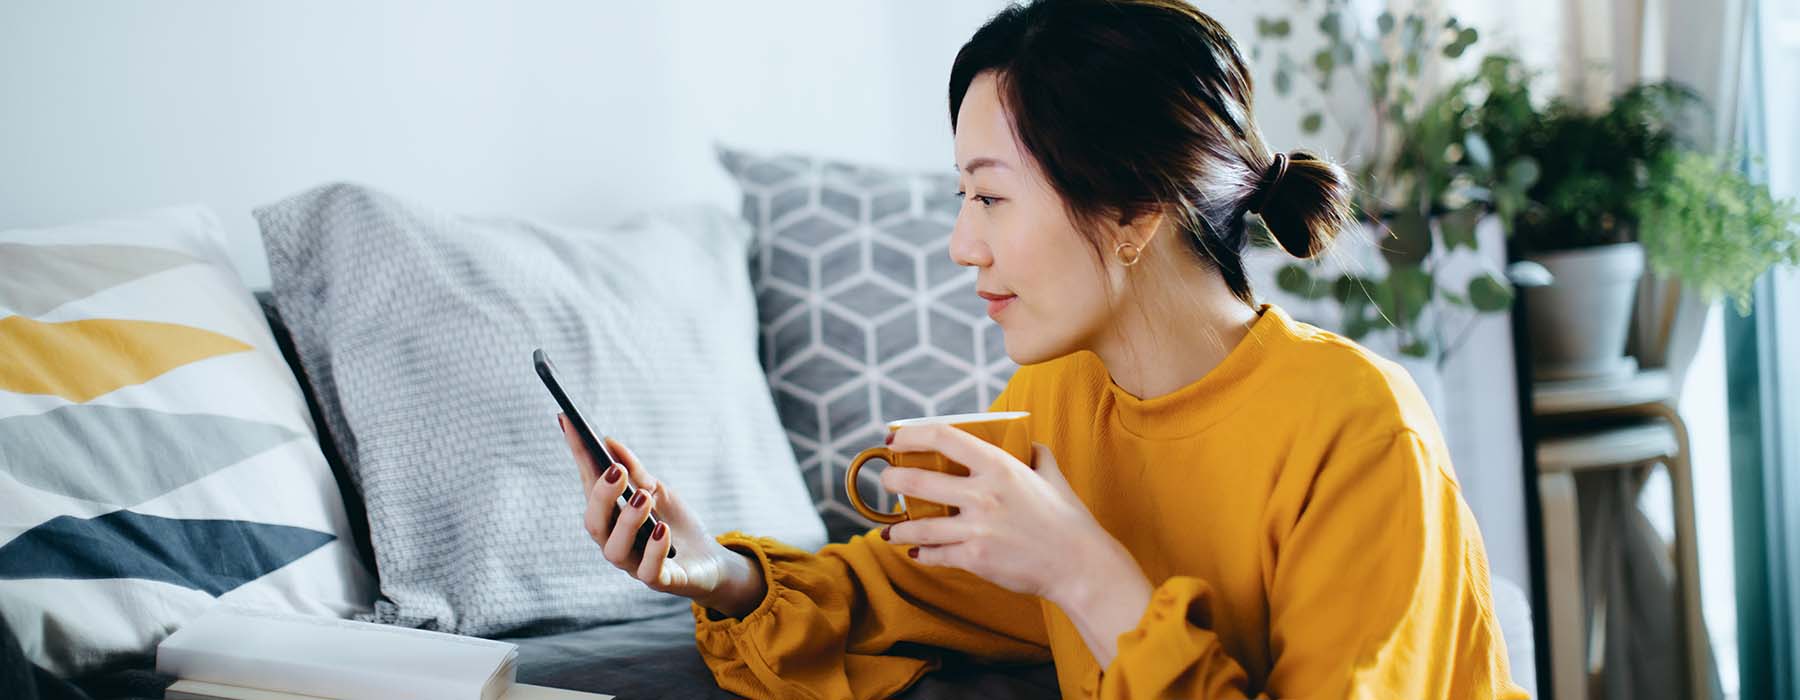 women sitting on the floor by the sofa, enjoying a cup of coffee and using smartphone